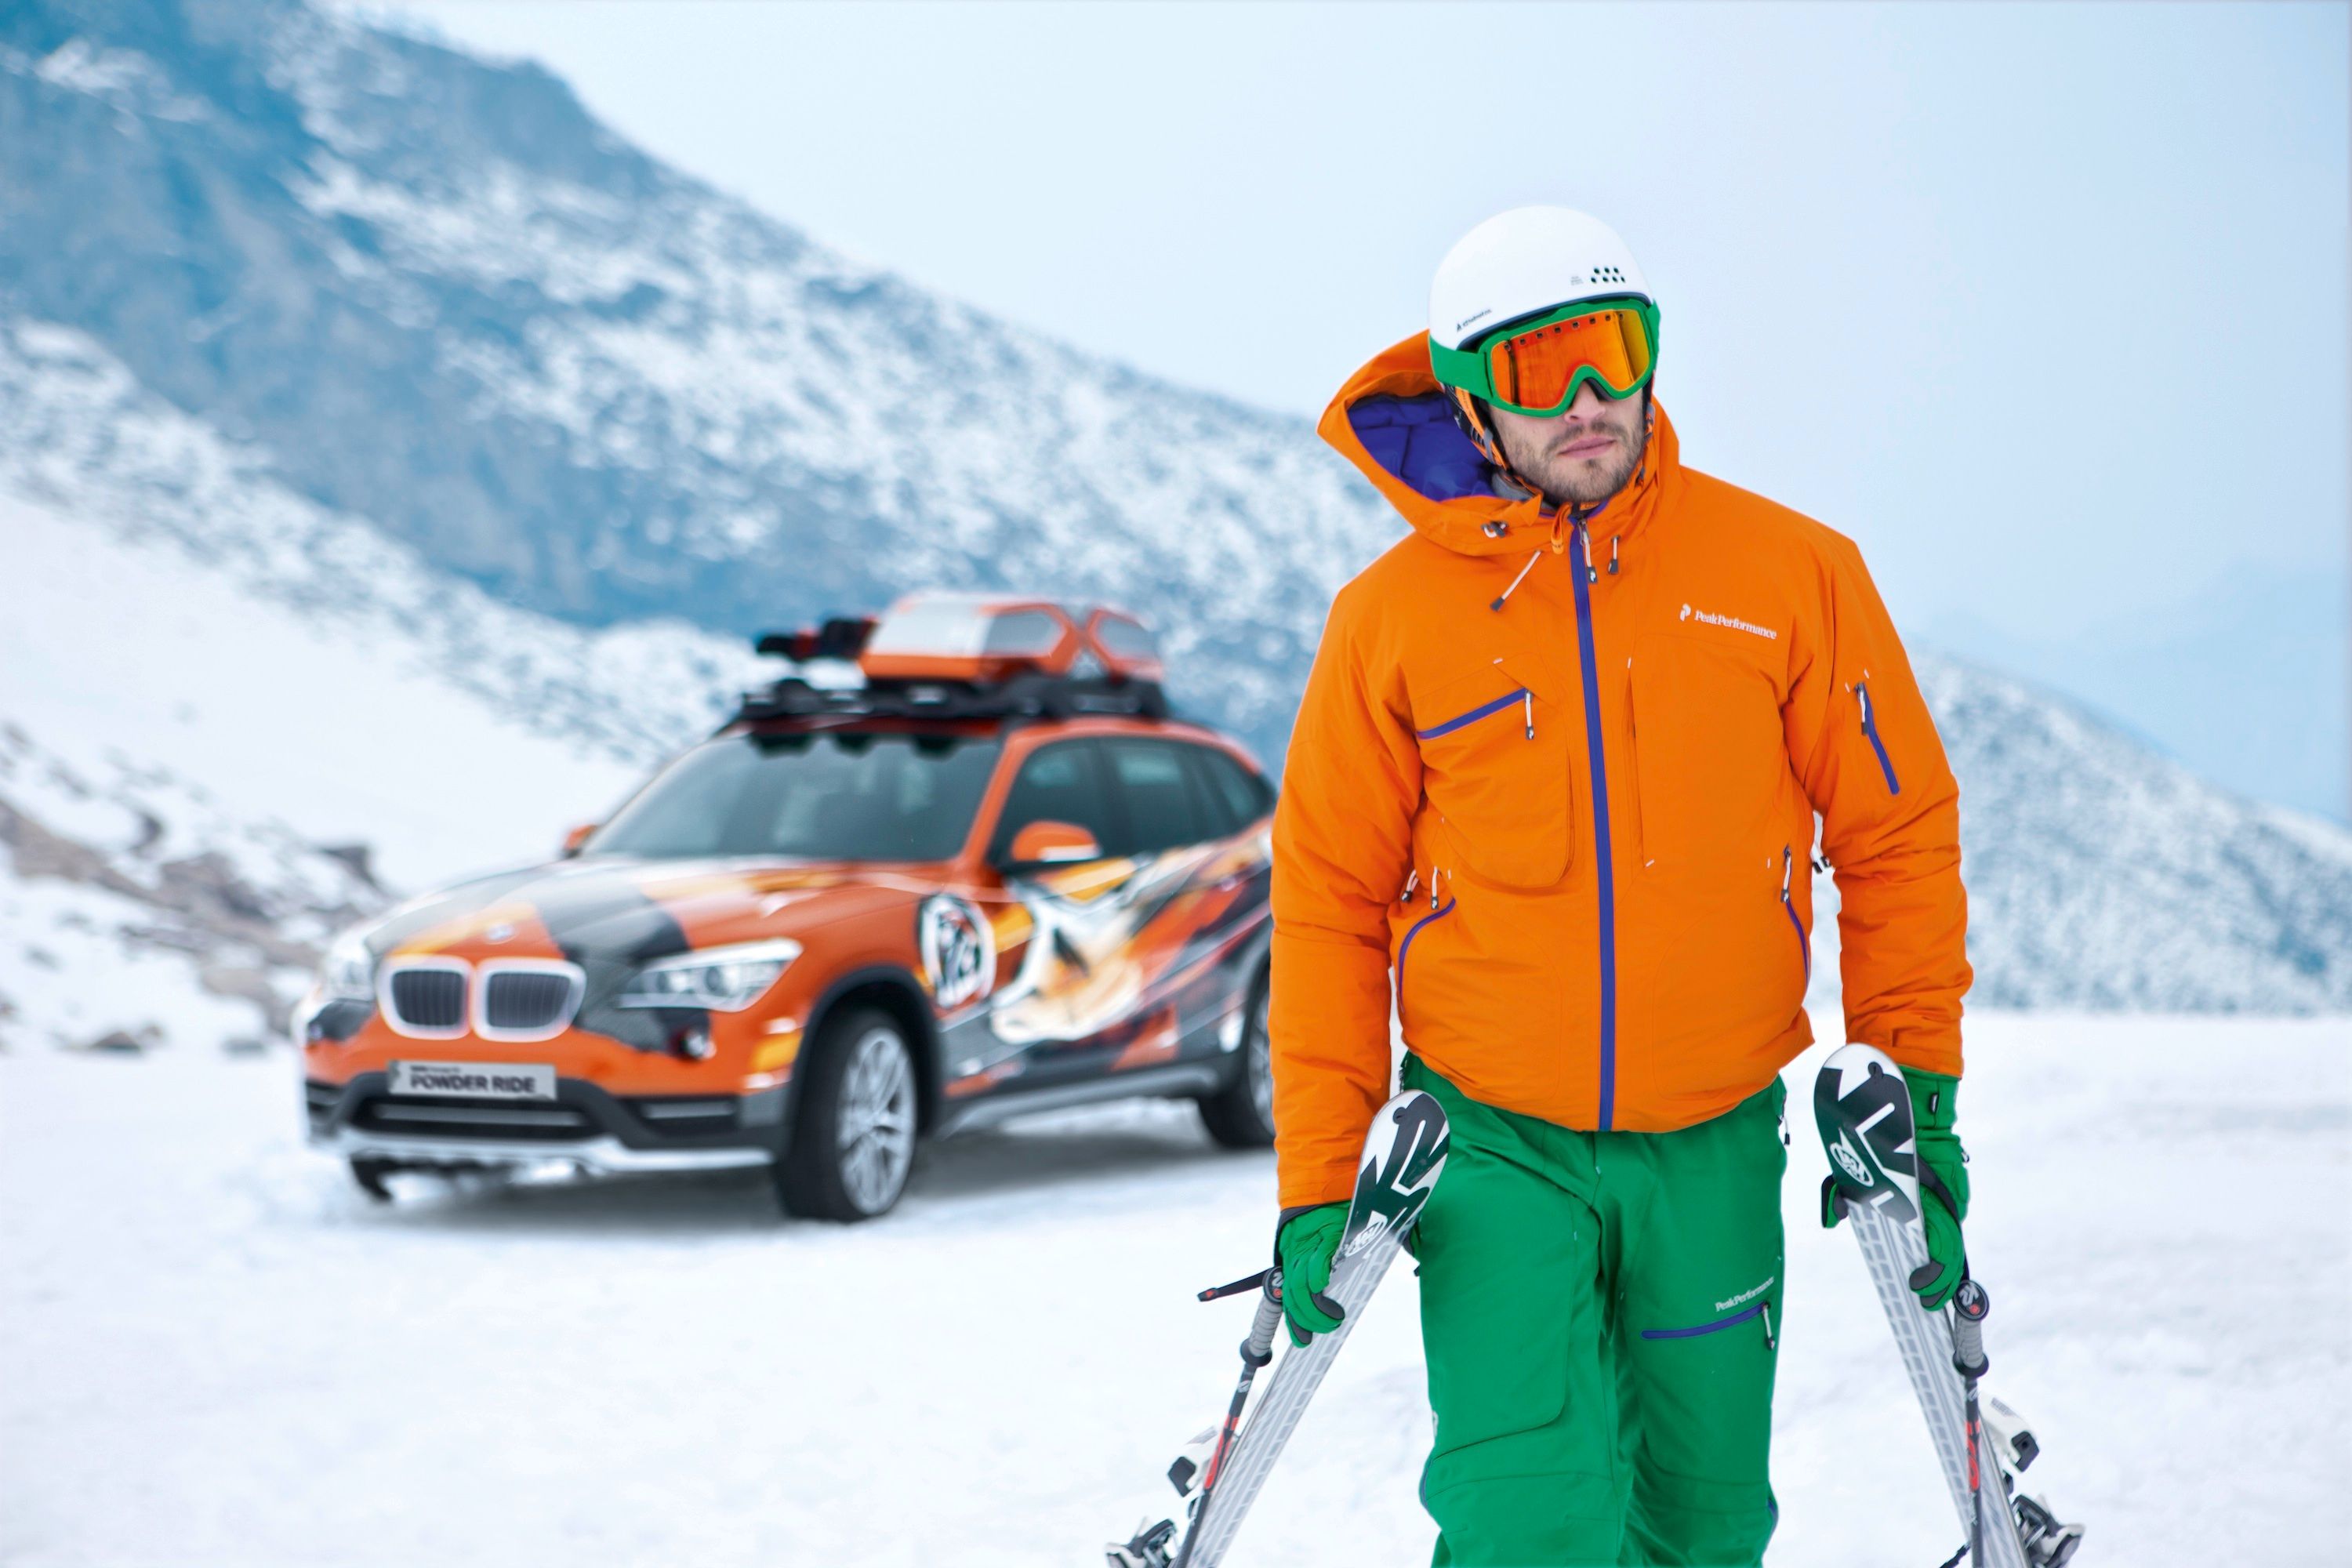 2013 BMW X1 Powder Ride and Concept K2 Special Editions